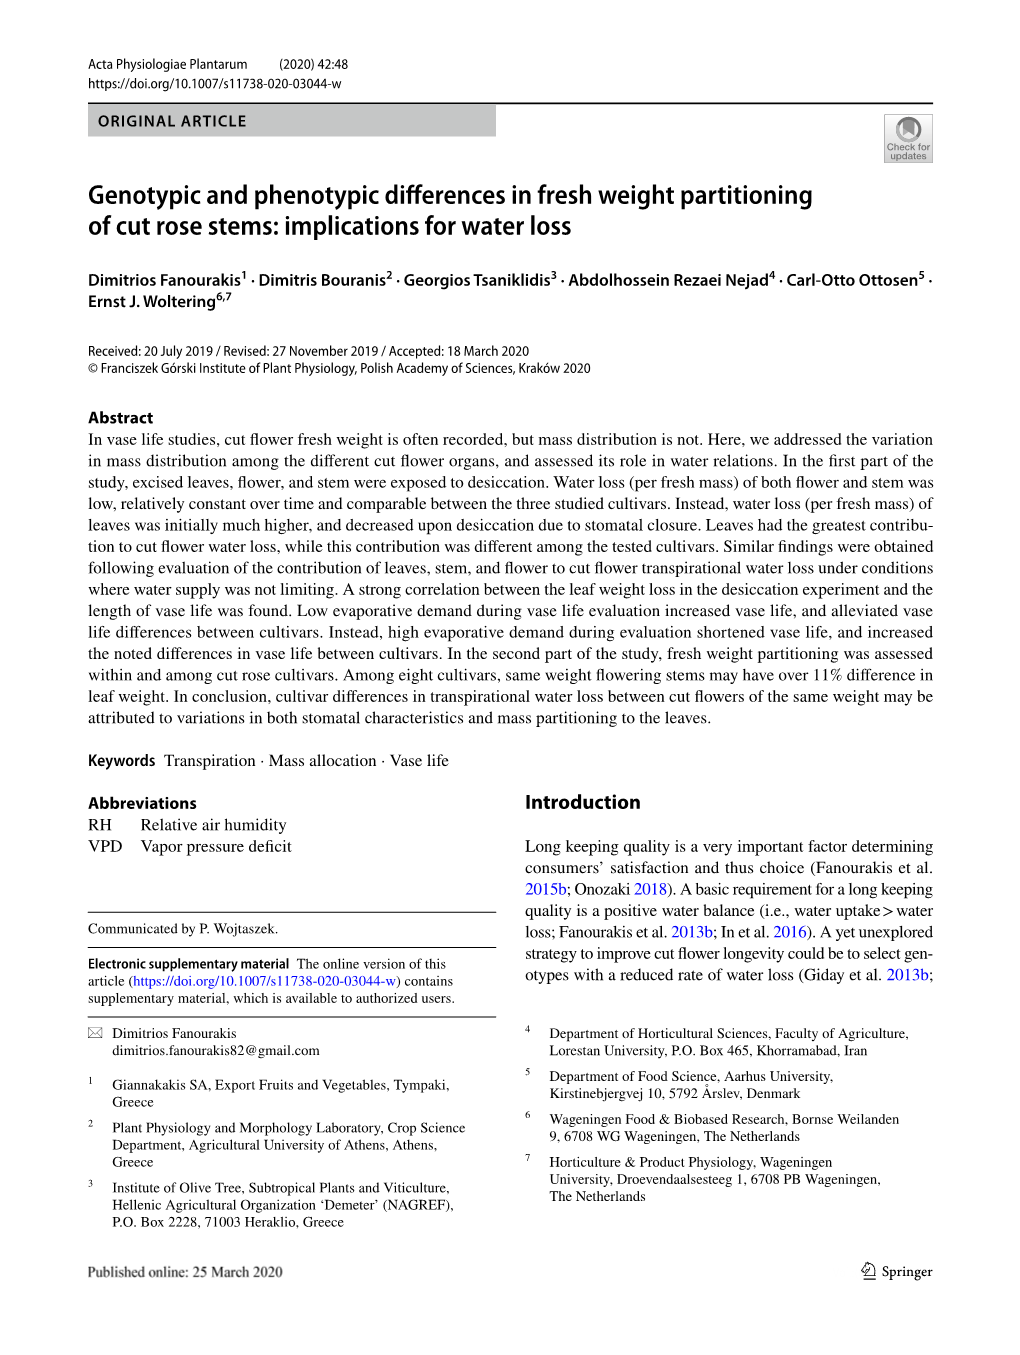 Genotypic and Phenotypic Differences in Fresh Weight Partitioning of Cut